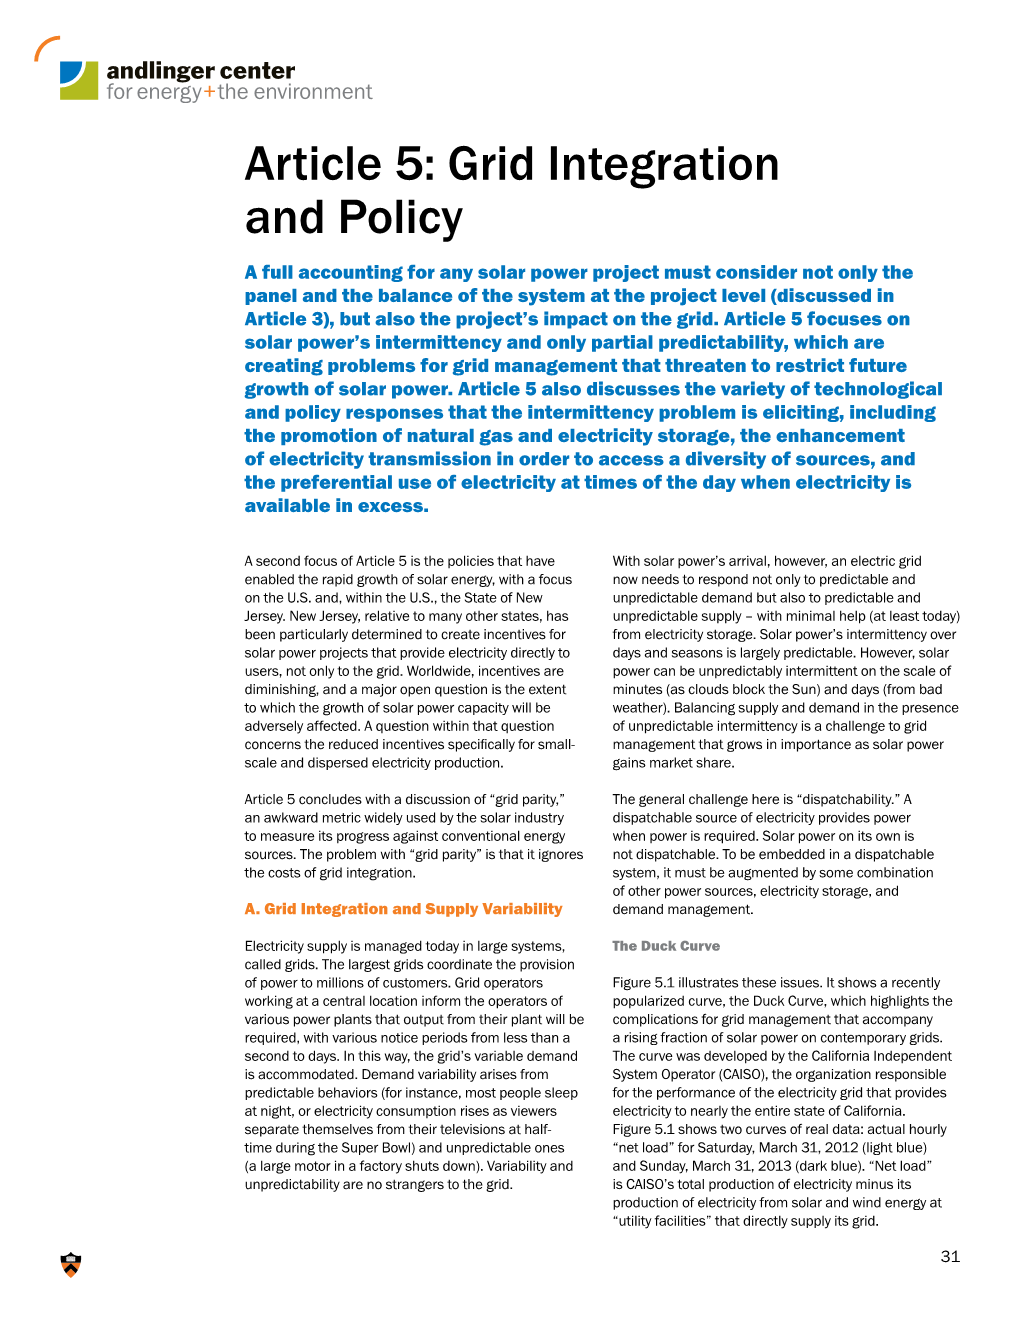 Article 5: Grid Integration and Policy